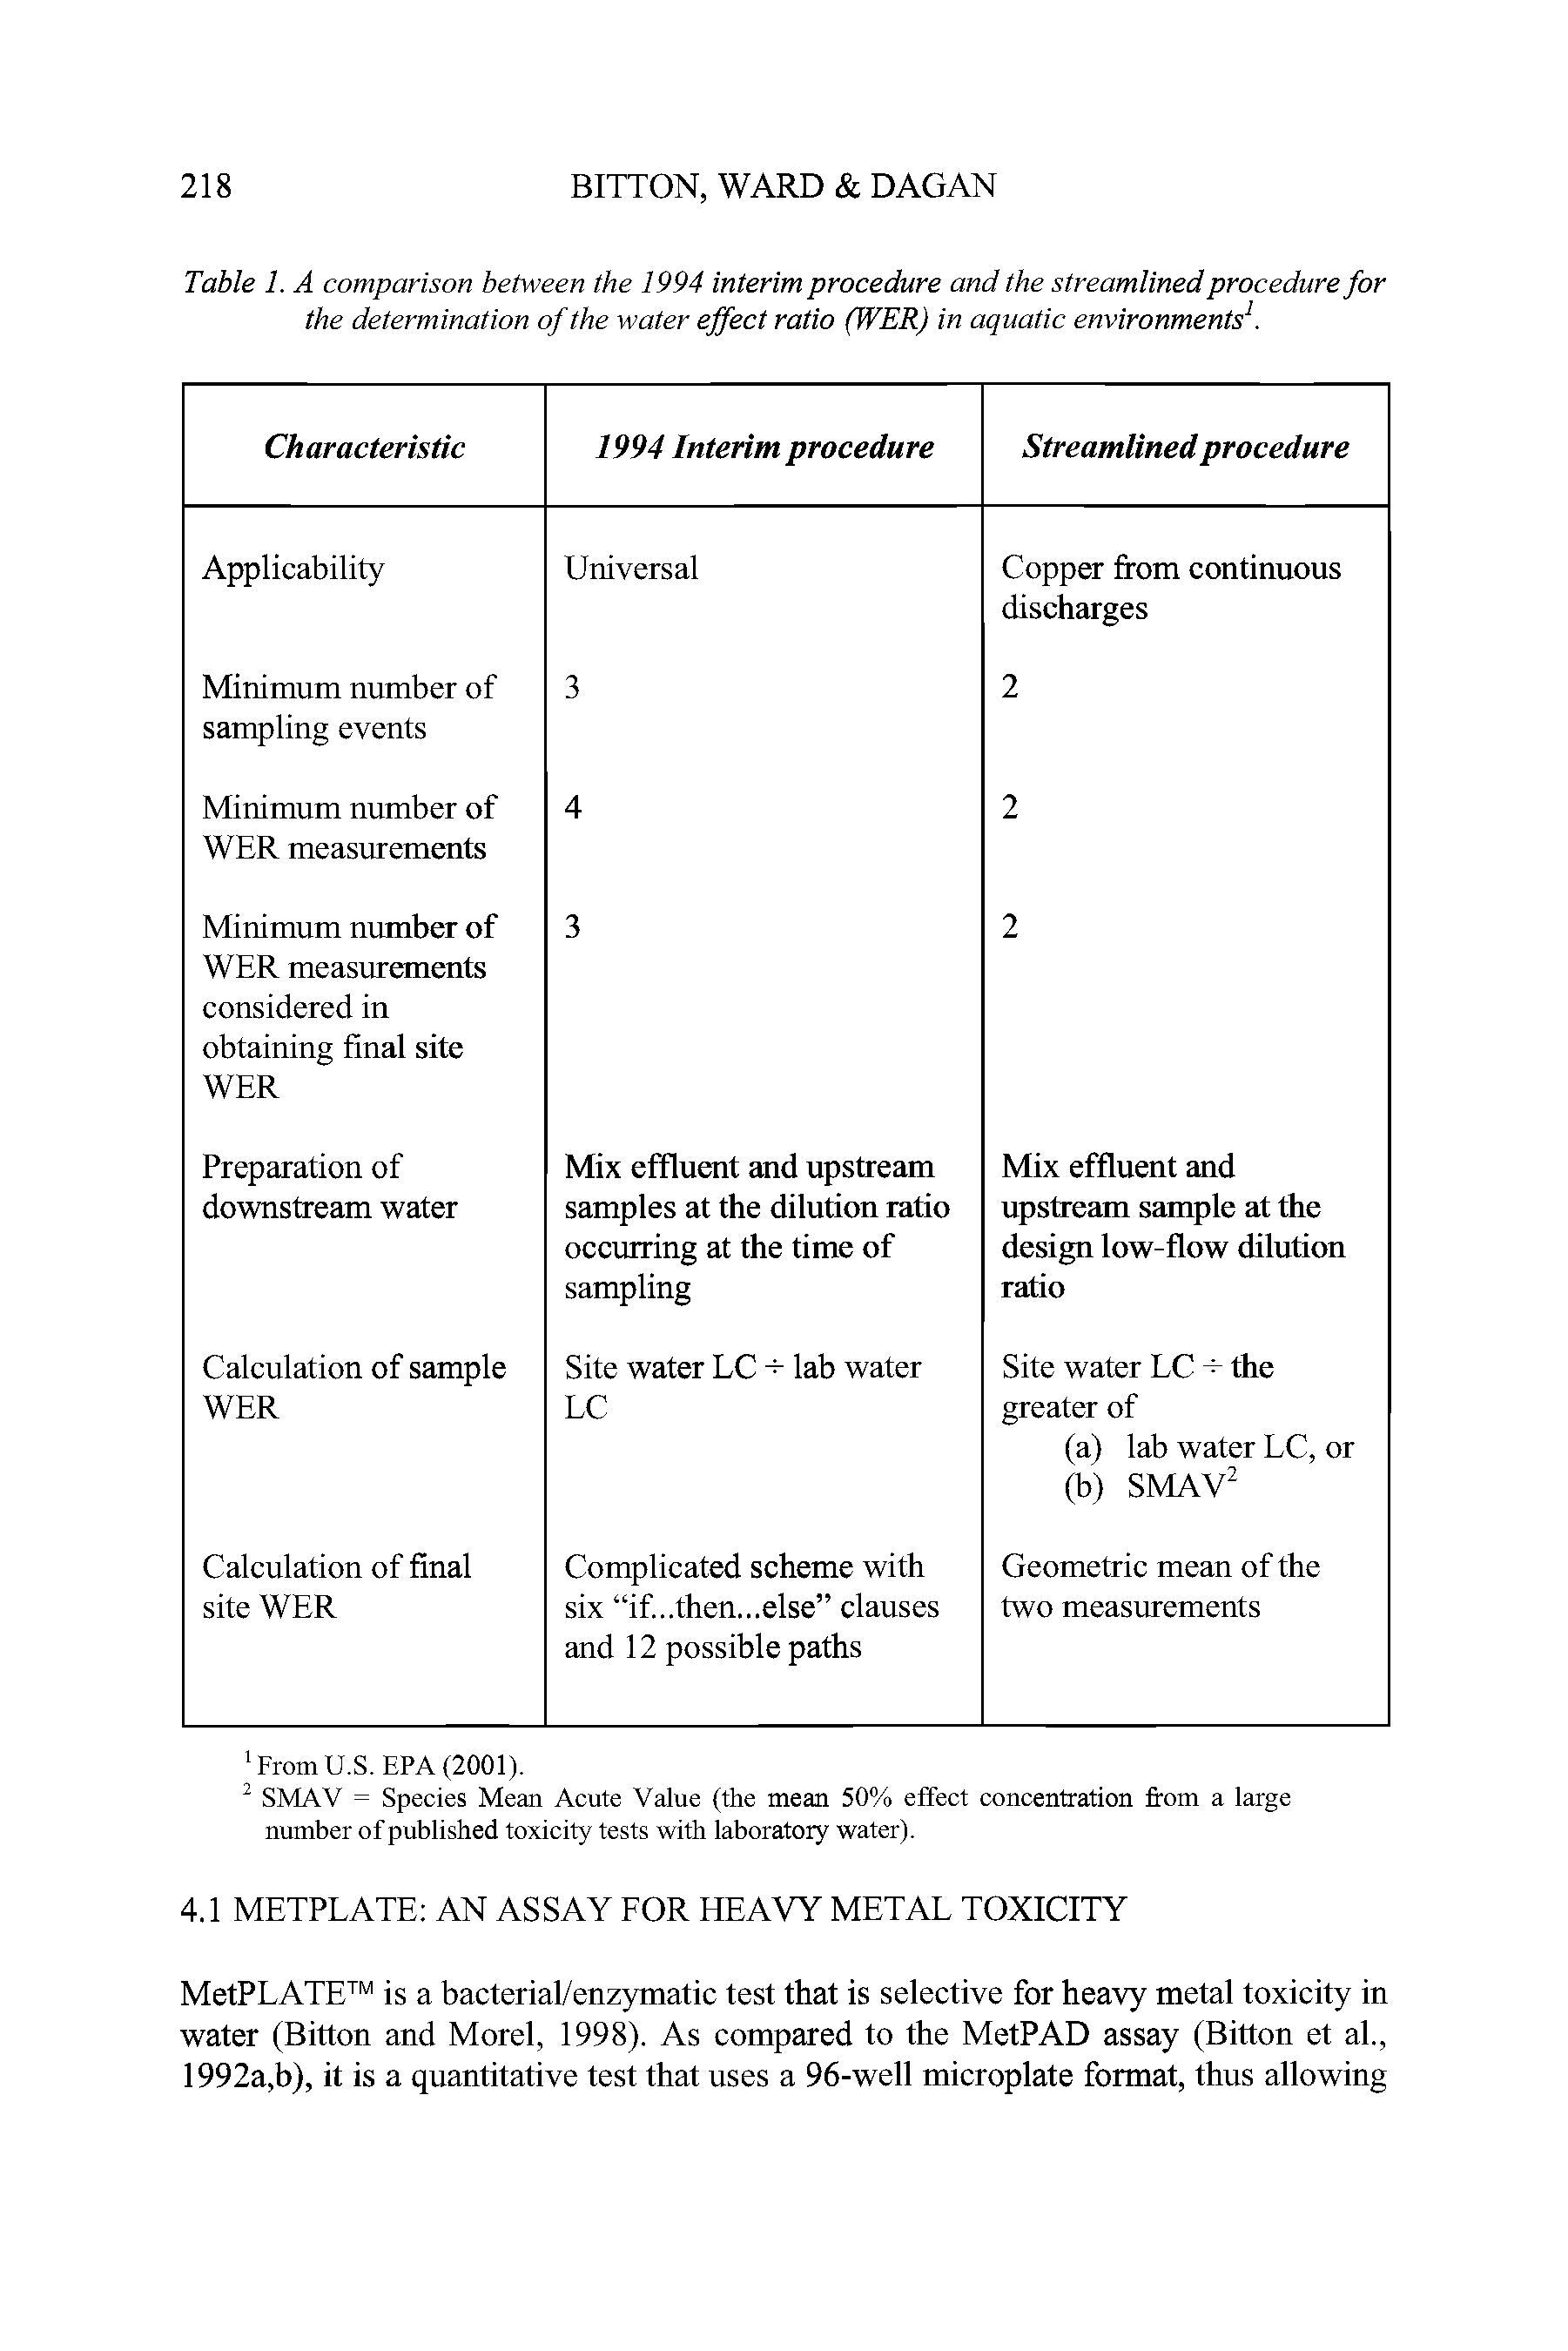 Table 1. A comparison between the 1994 interim procedure and the streamlined procedure for the determination of the water effect ratio (WER) in aquatic environments1.